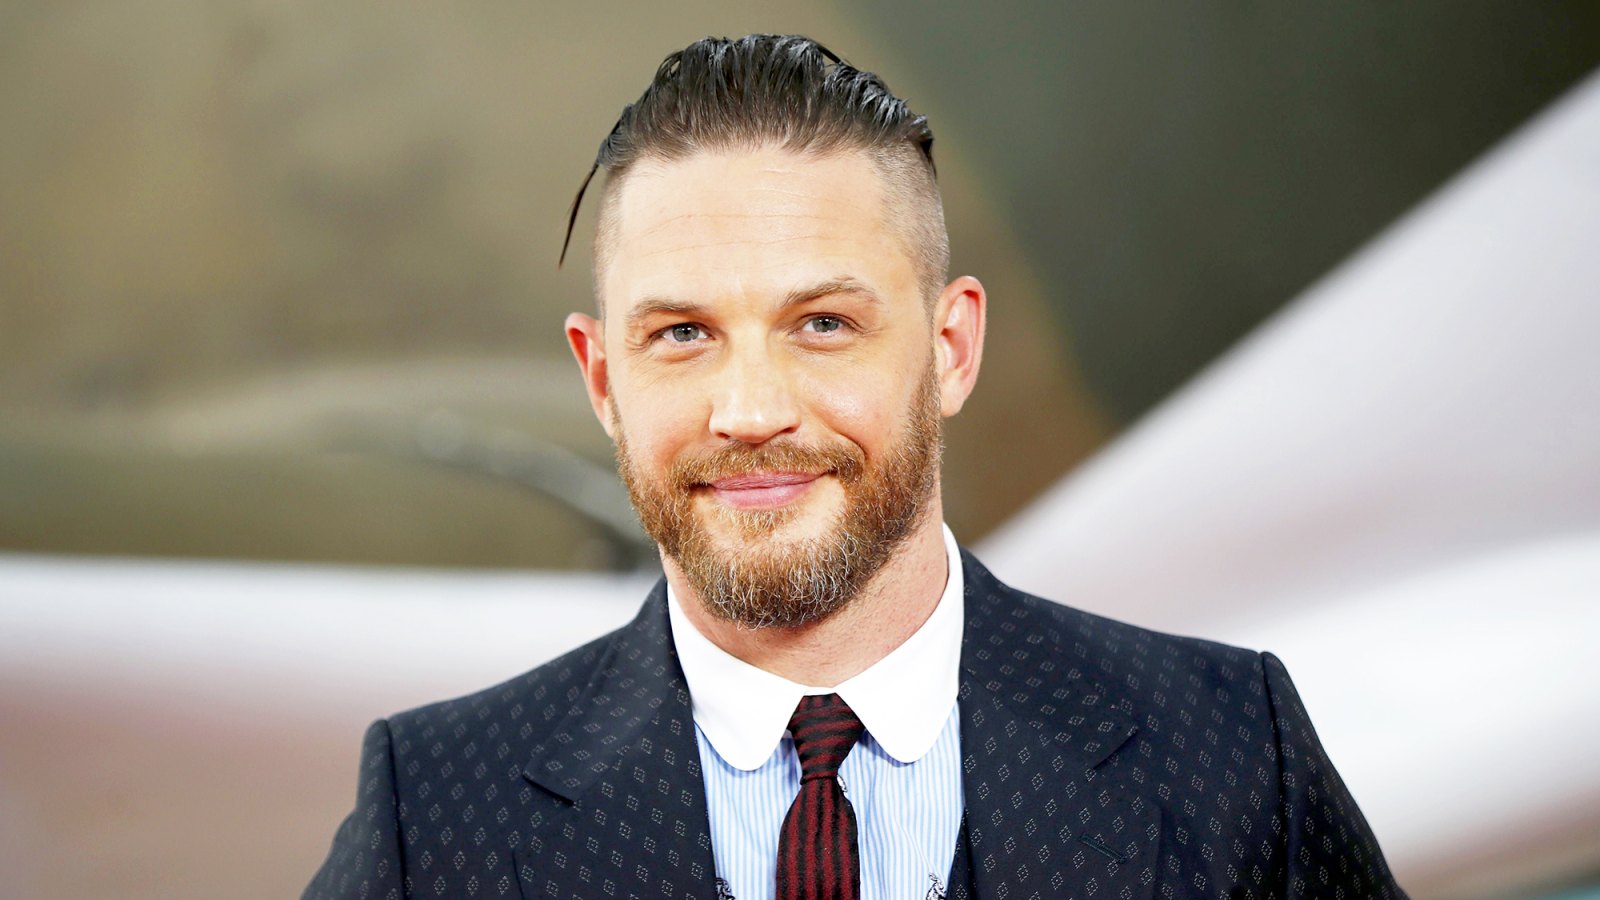 Tom Hardy arrives for the world 2017 premiere of "Dunkirk" in London, England.